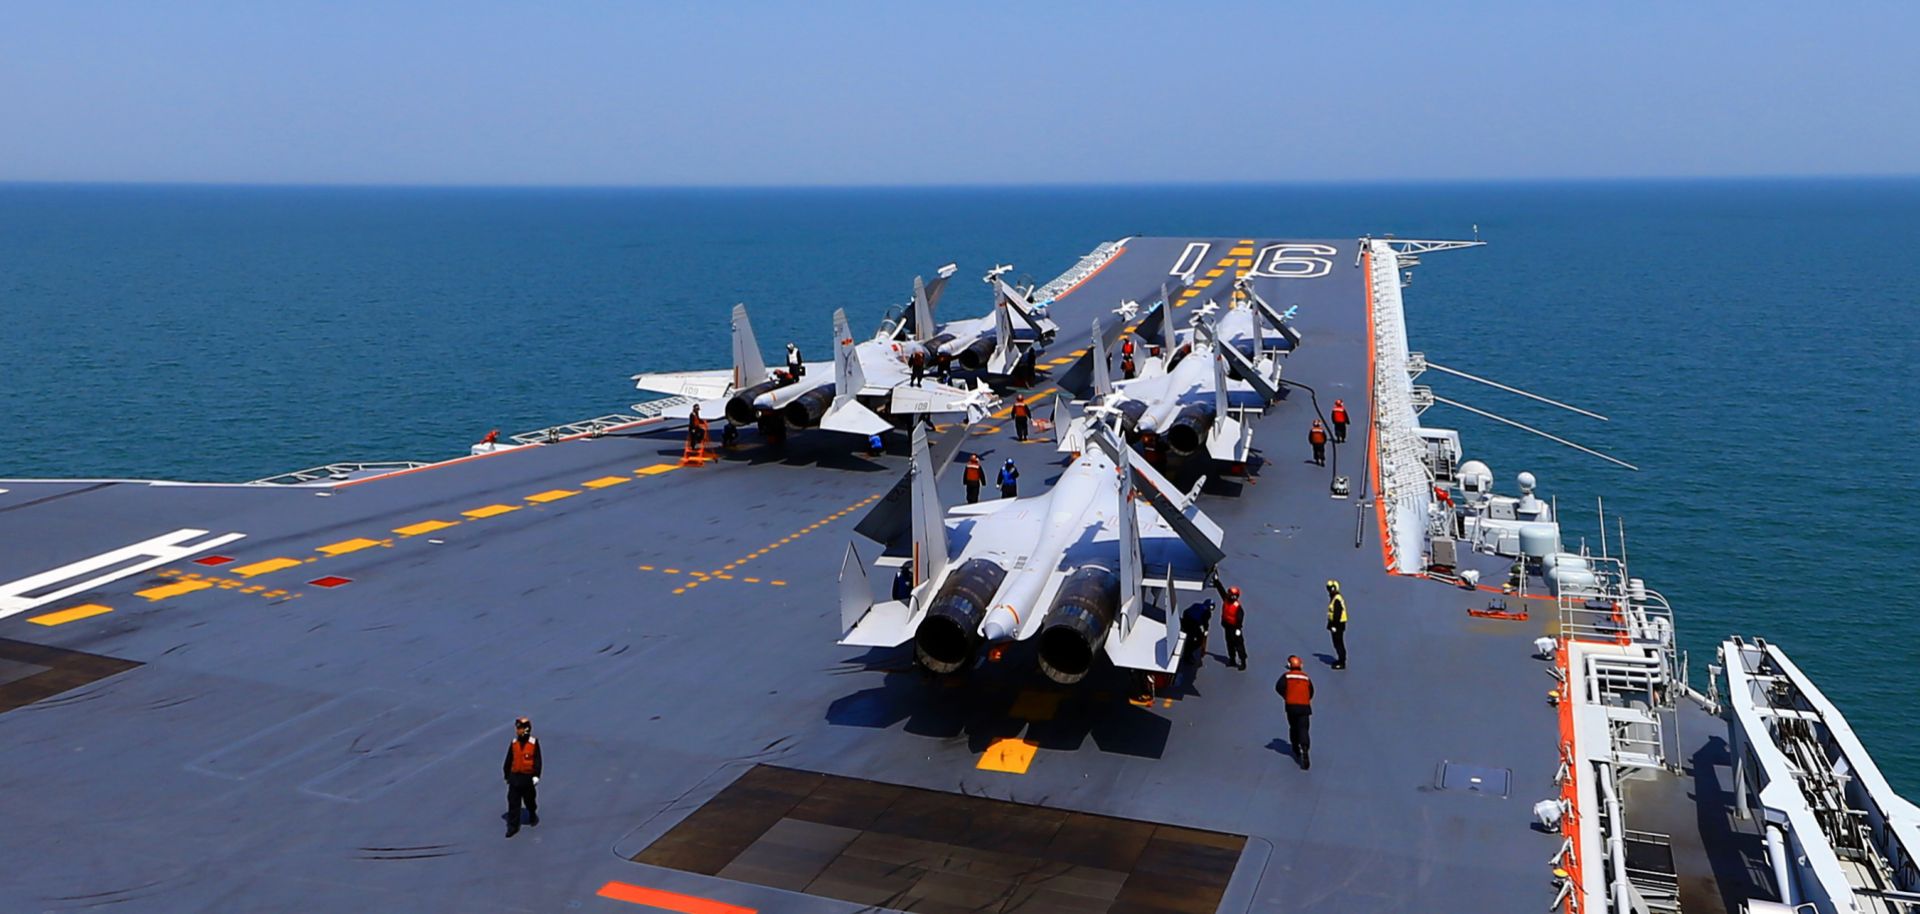 This photo taken on April 24, 2018, shows J-15 fighter jets on China's sole operational aircraft carrier, the Liaoning, during a drill at sea.